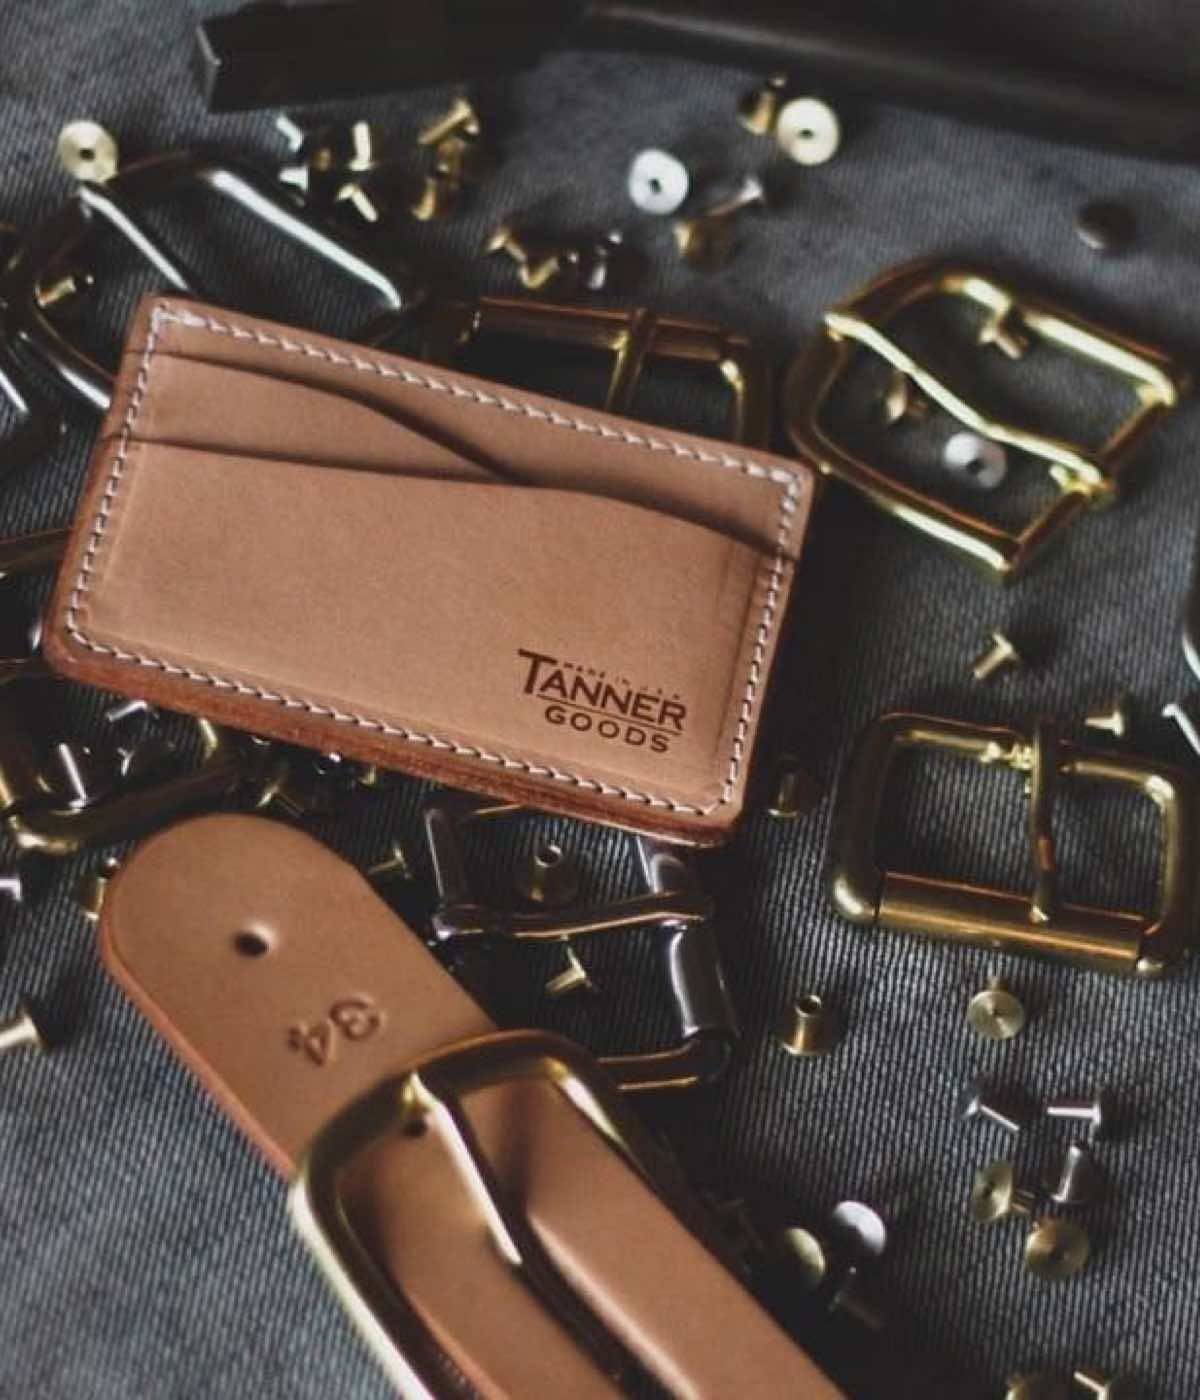 Deluxe Timber — I love this Tanner Goods slim wallet! Check out...